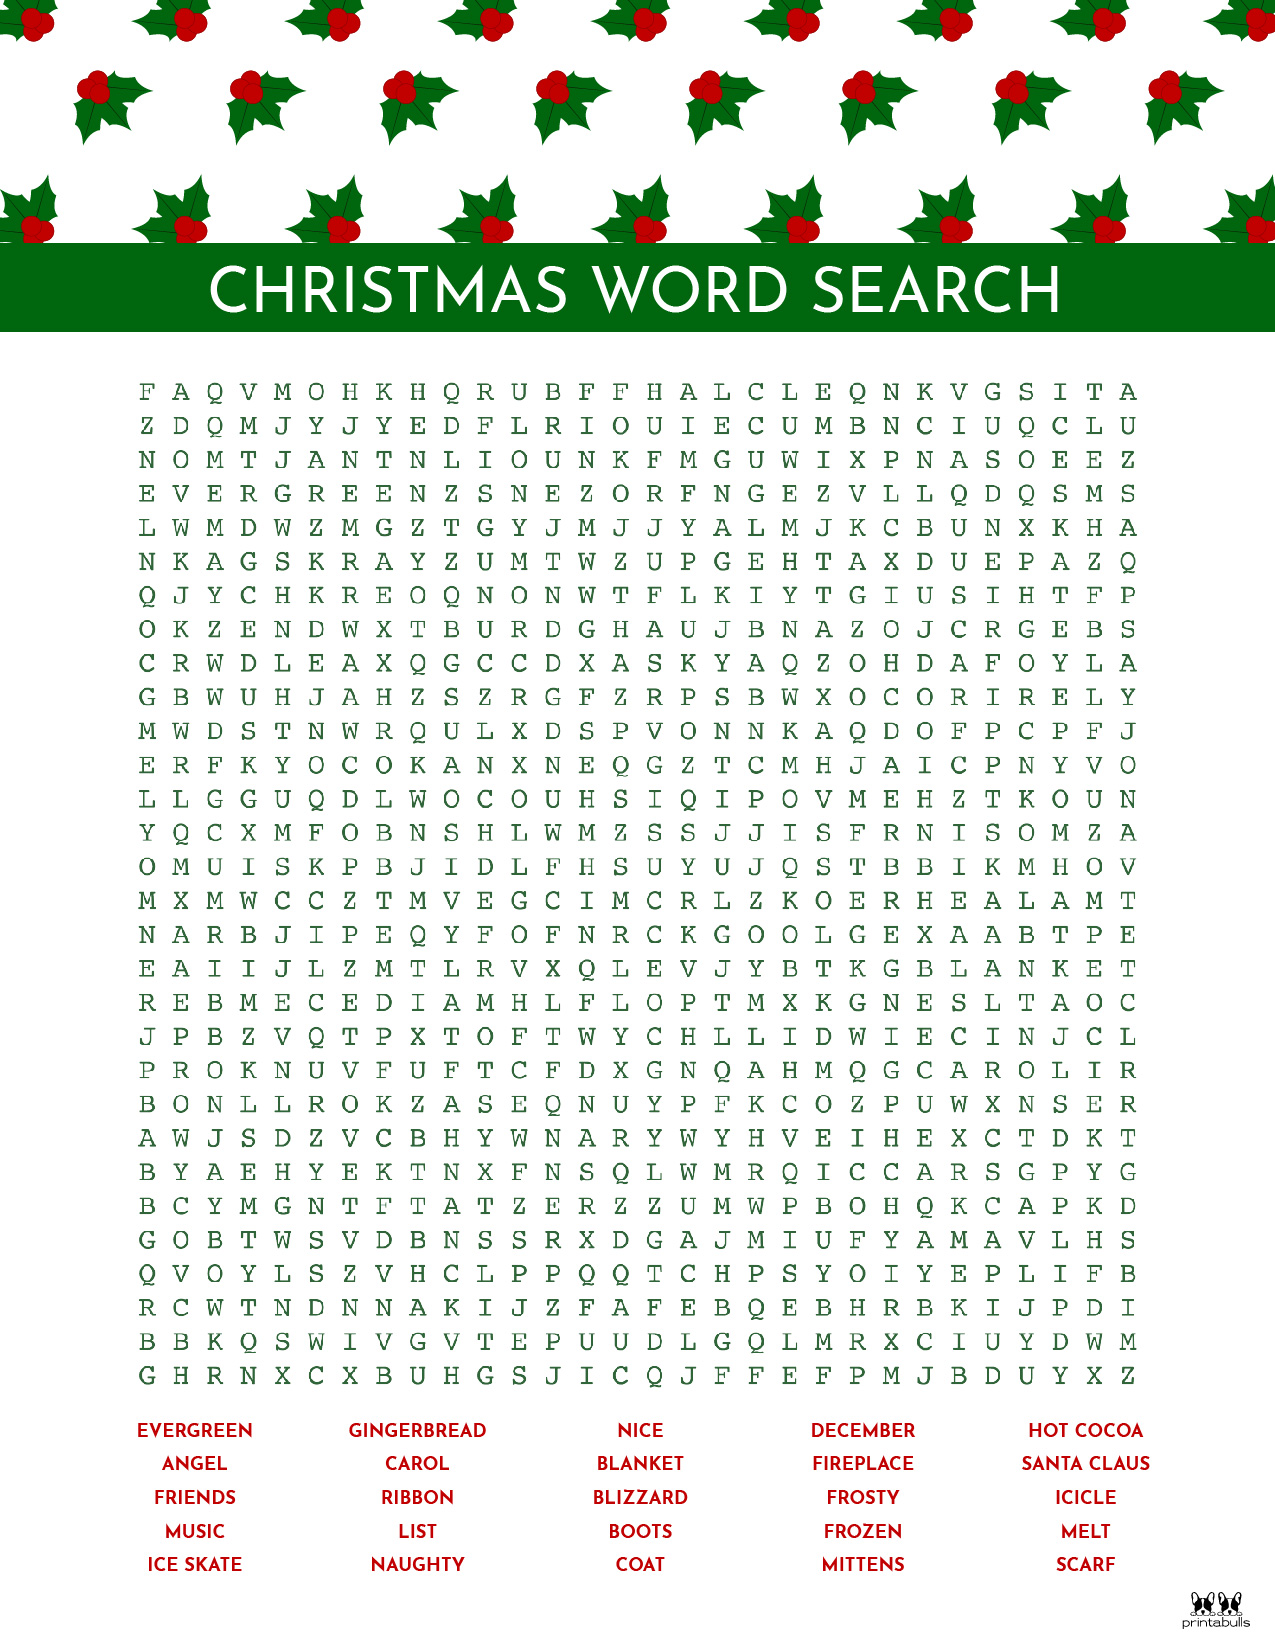 Holiday Word Searches Printable Web Printable Word Search Puzzles 